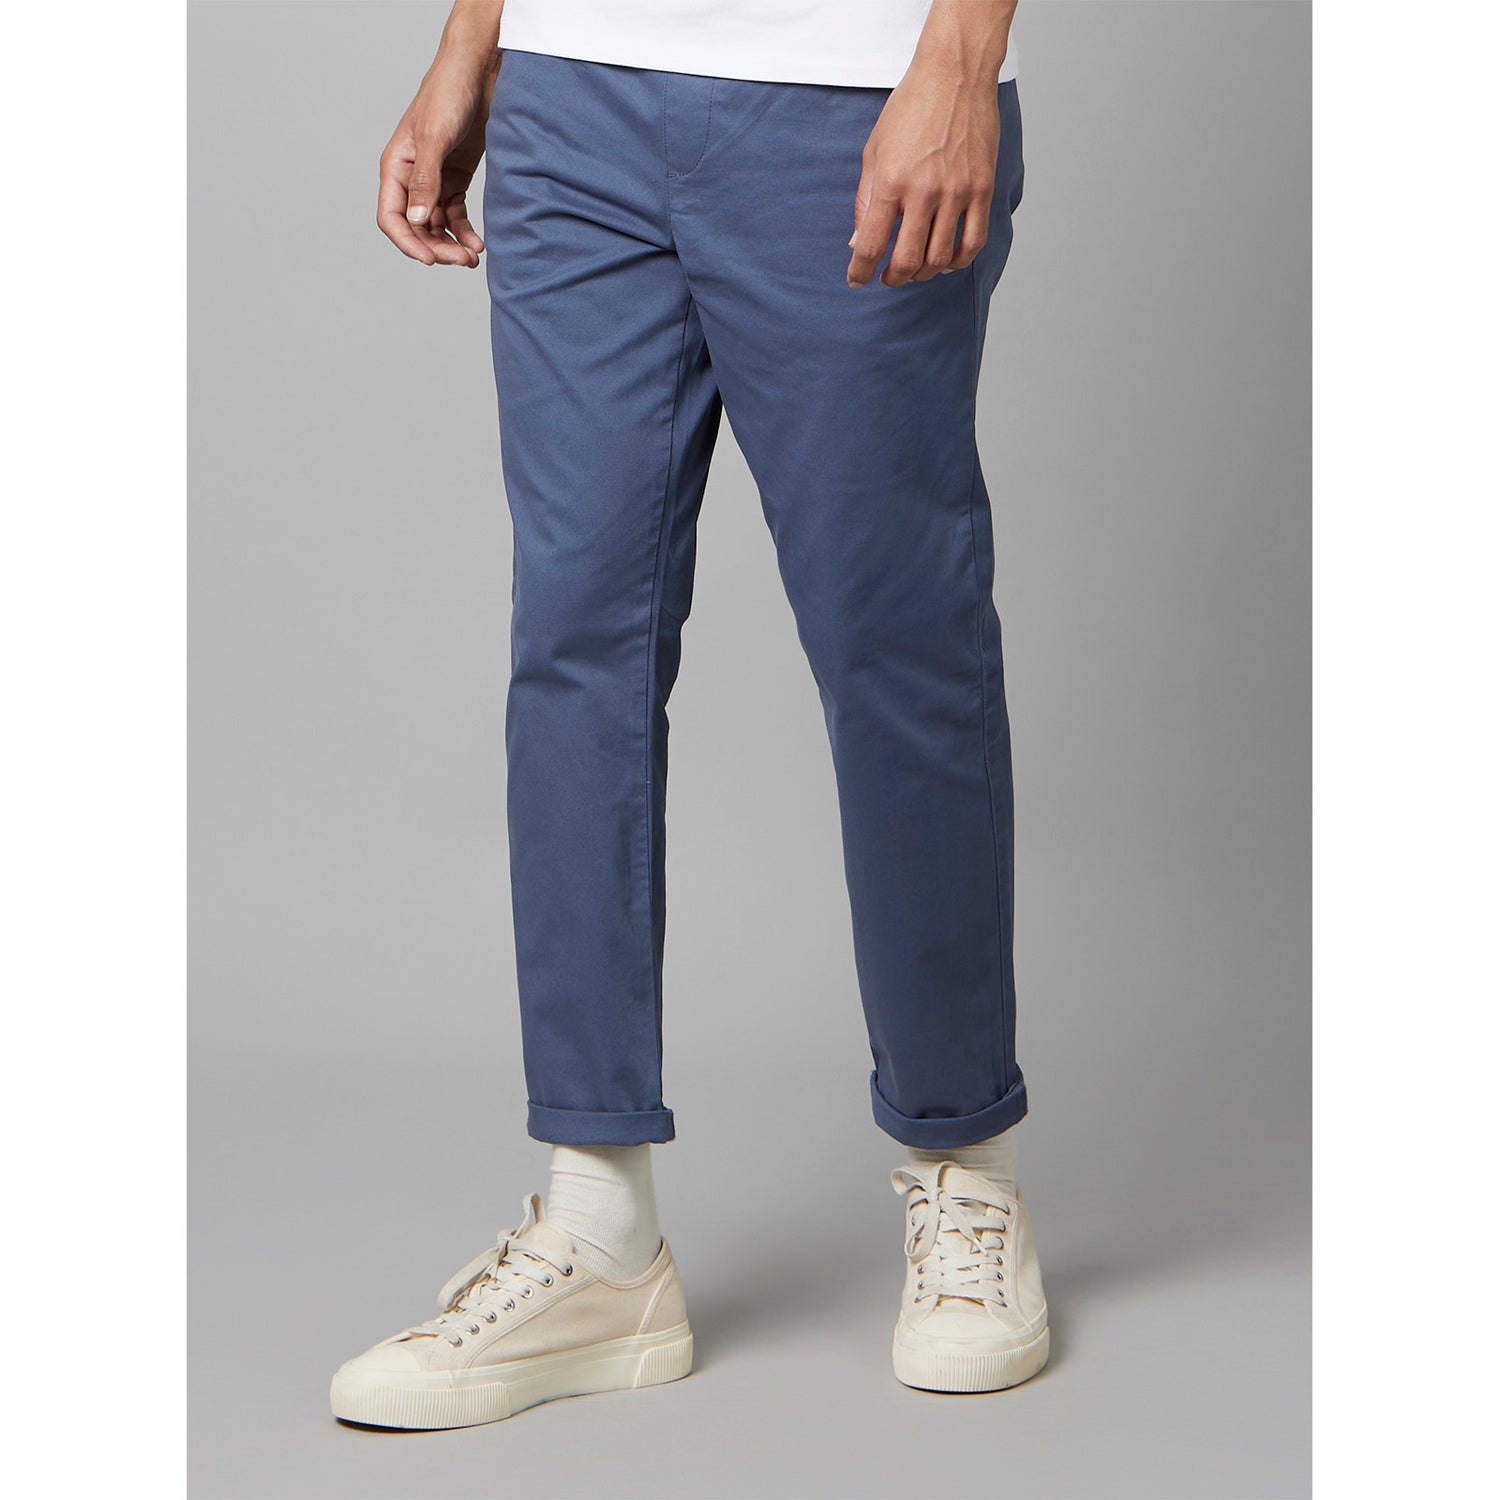 Blue Solid Cotton Classic Trousers (DOTRIP)